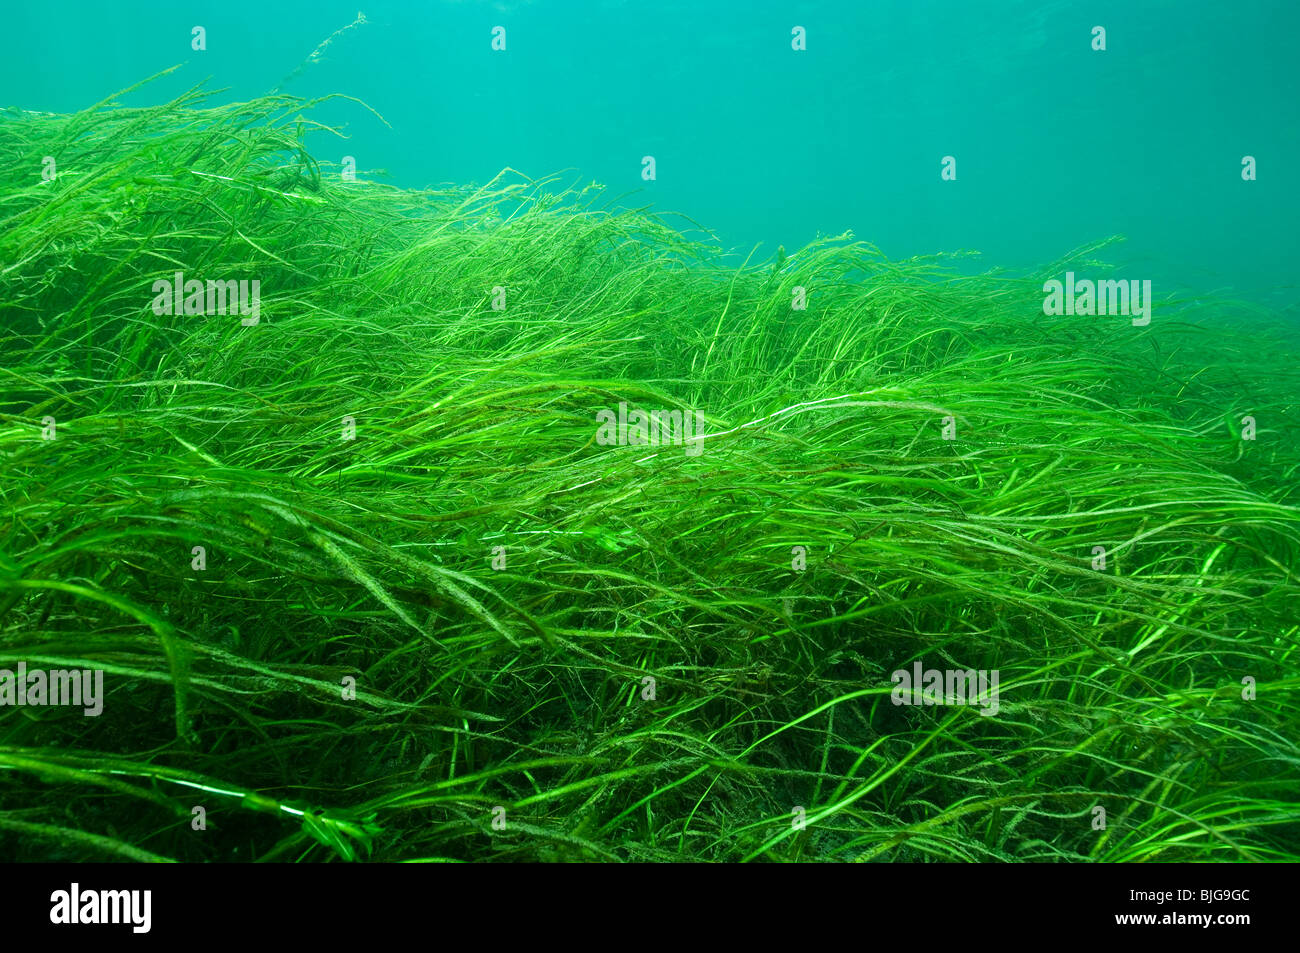 American Eel-grass underwater in the St. Lawrence River in canada Stock Photo